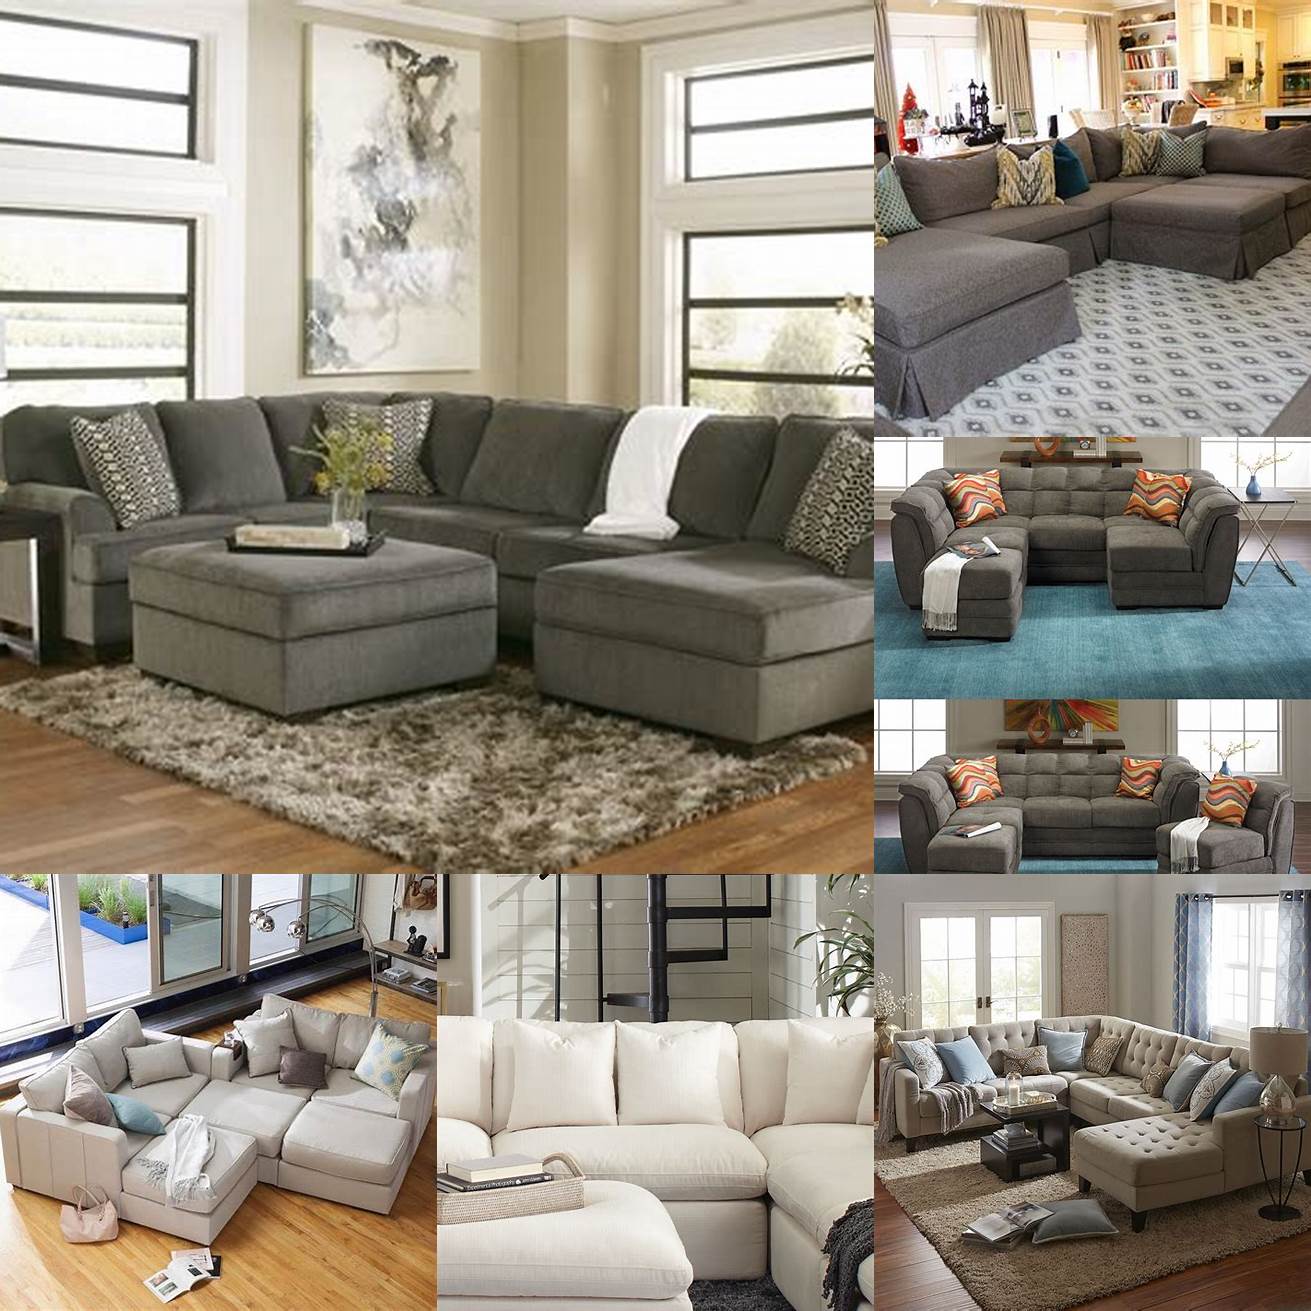 A large armless sectional can be configured in a variety of ways to create a custom seating arrangement